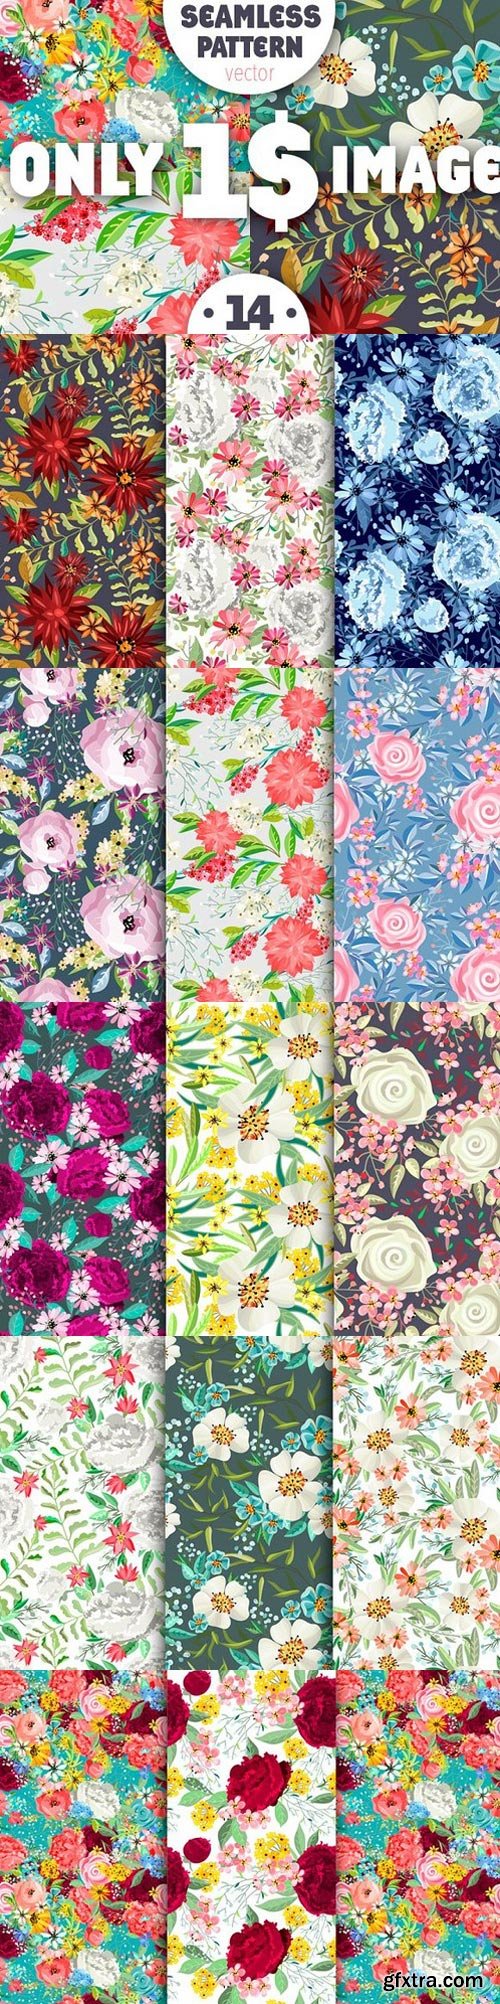 Pack of seamless patterns